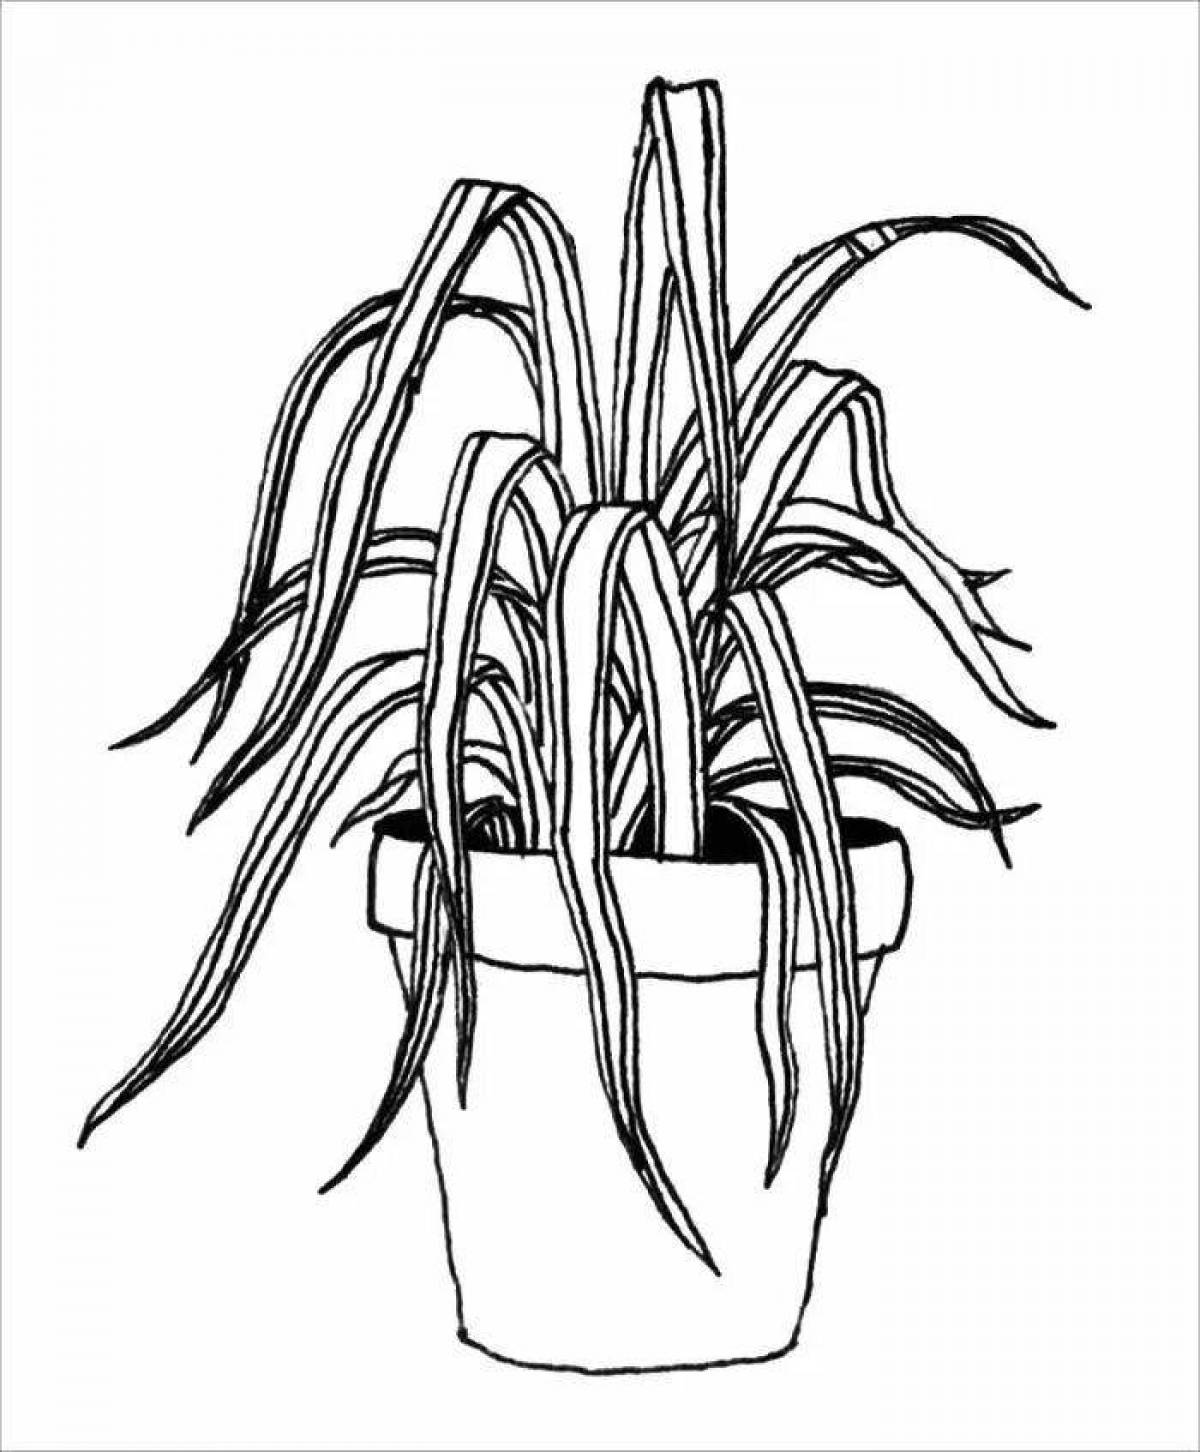 Cute houseplant coloring page for 4-5 year olds